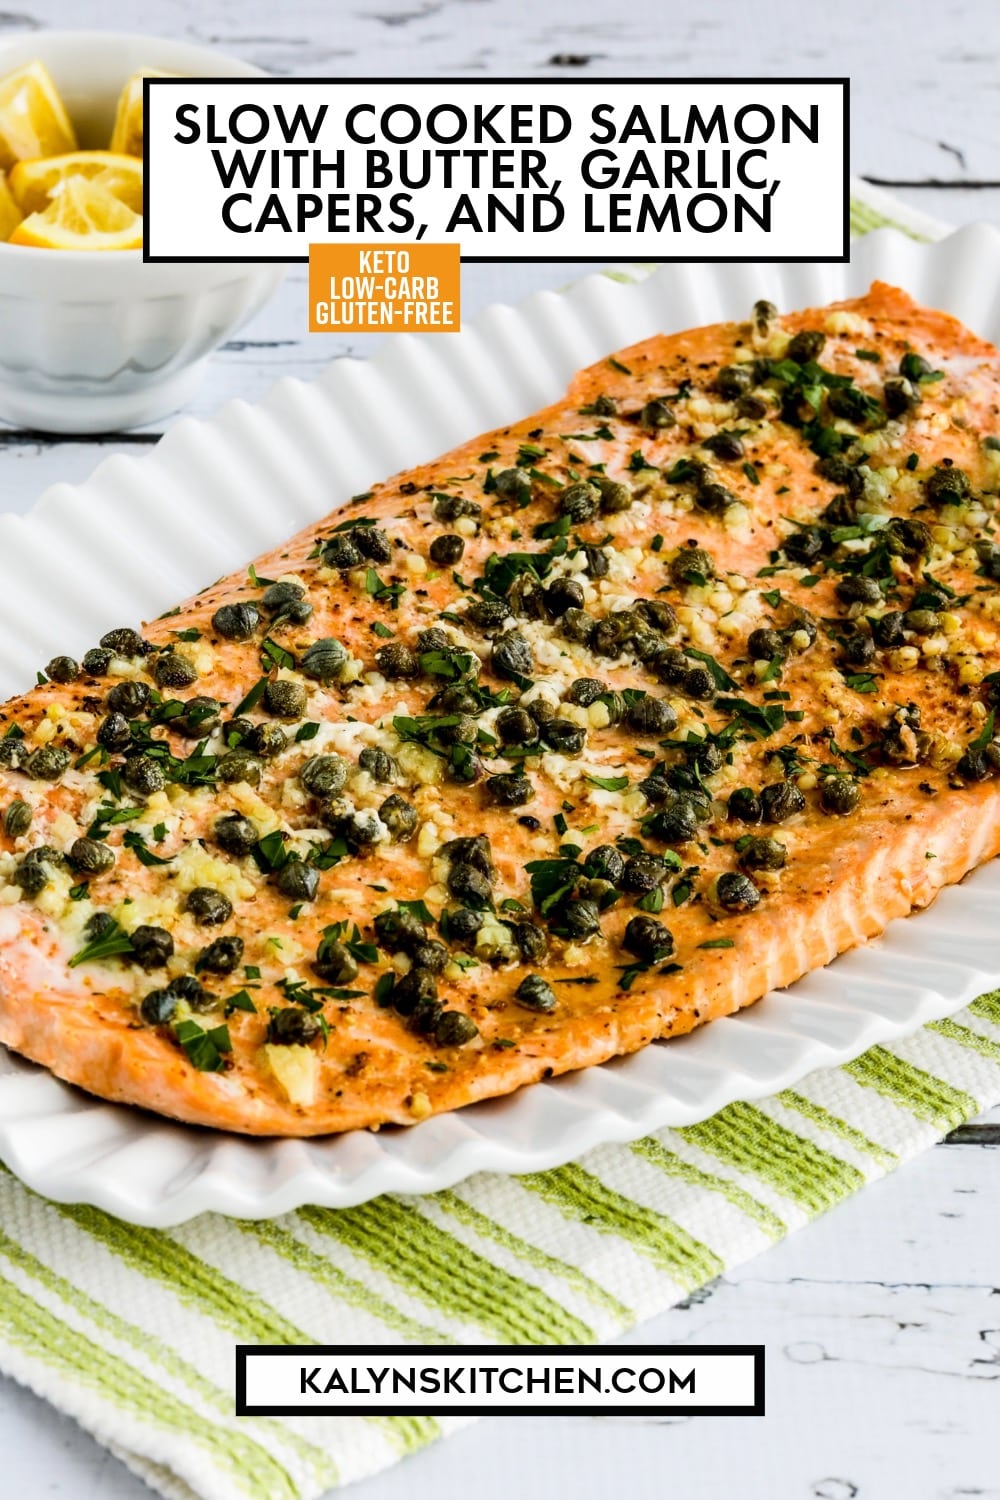 Pinterest image of Slow Cooked Salmon with Butter, Garlic, Capers, and Lemon